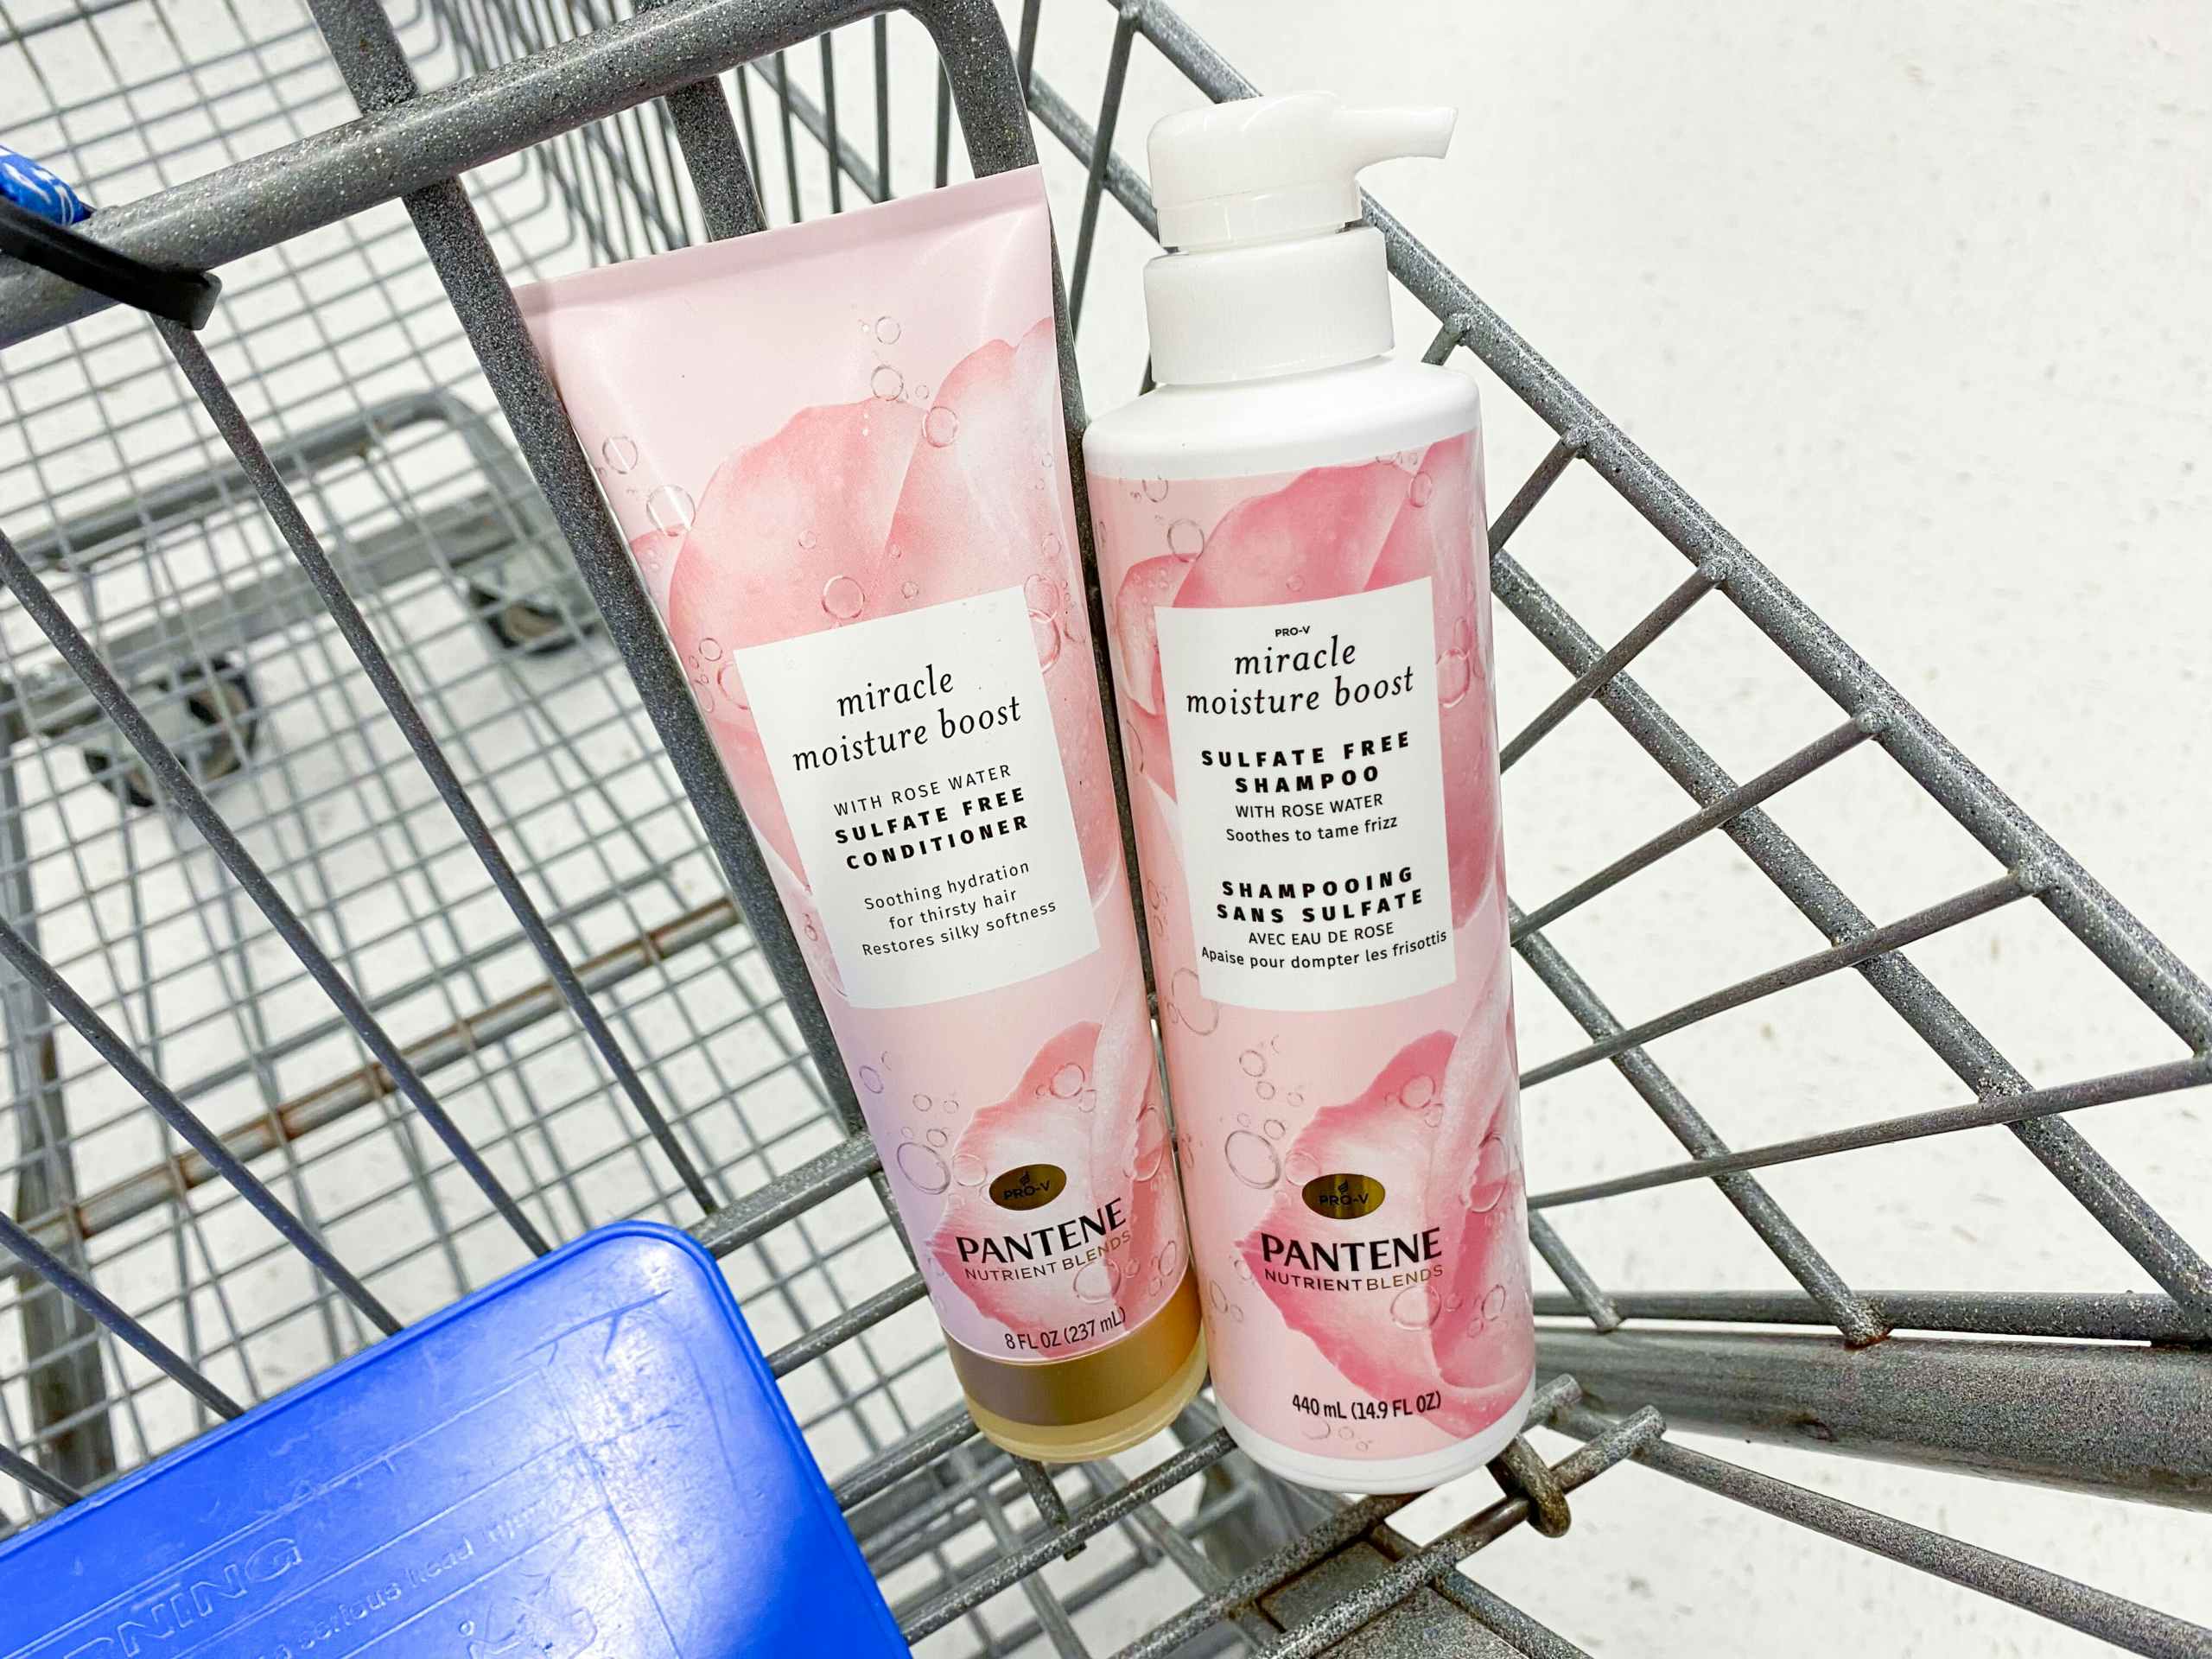 Pantene Nutrient Blends Shampoo and Conditioner in Walmart shopping cart